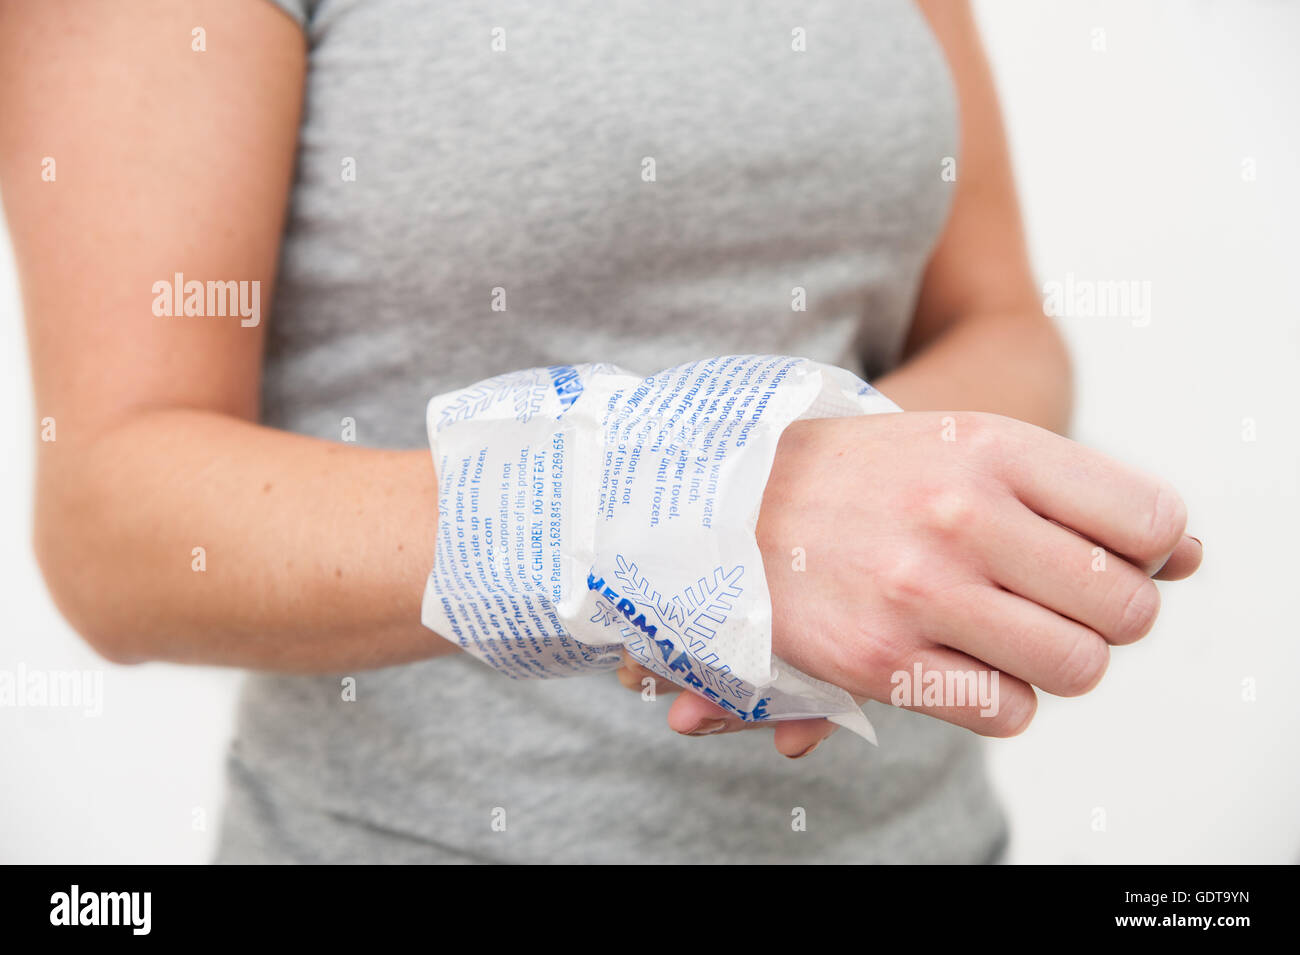 Female holding a Thermafreeze Ice Pack on her wrist to help with pain and discomfort Stock Photo